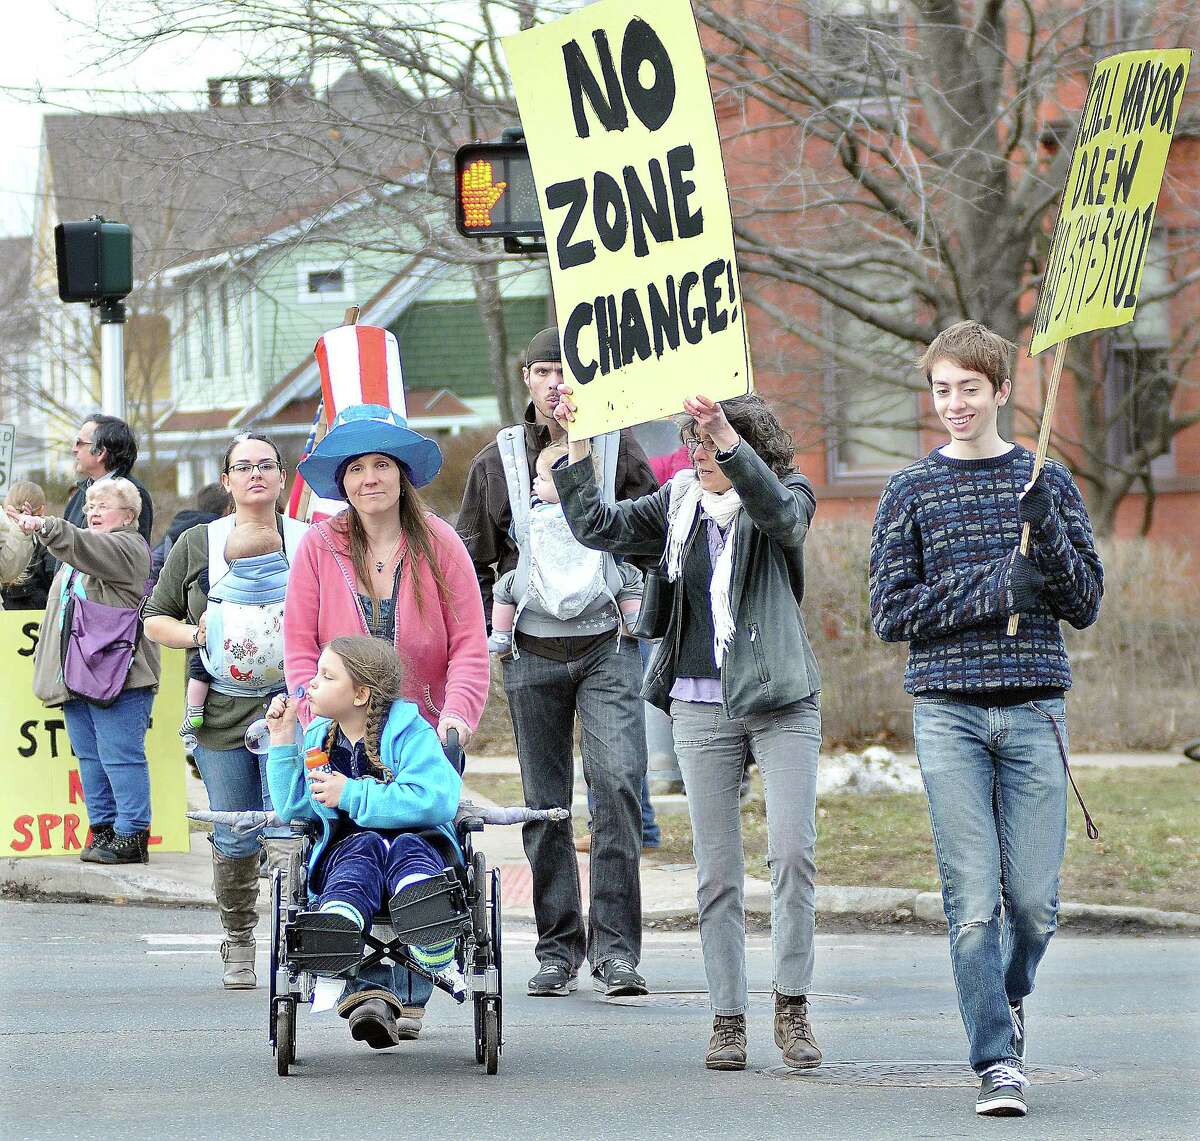 Catherine Avalone/The Middletown Press ¬ Approximately 40 Middletown residents protested carrying signs at the cross walk Monday at the intersection of Washington and High Streets in response to developer Robert Landinoís proposal to change zoning for a portion of Washington Street in Middletown.